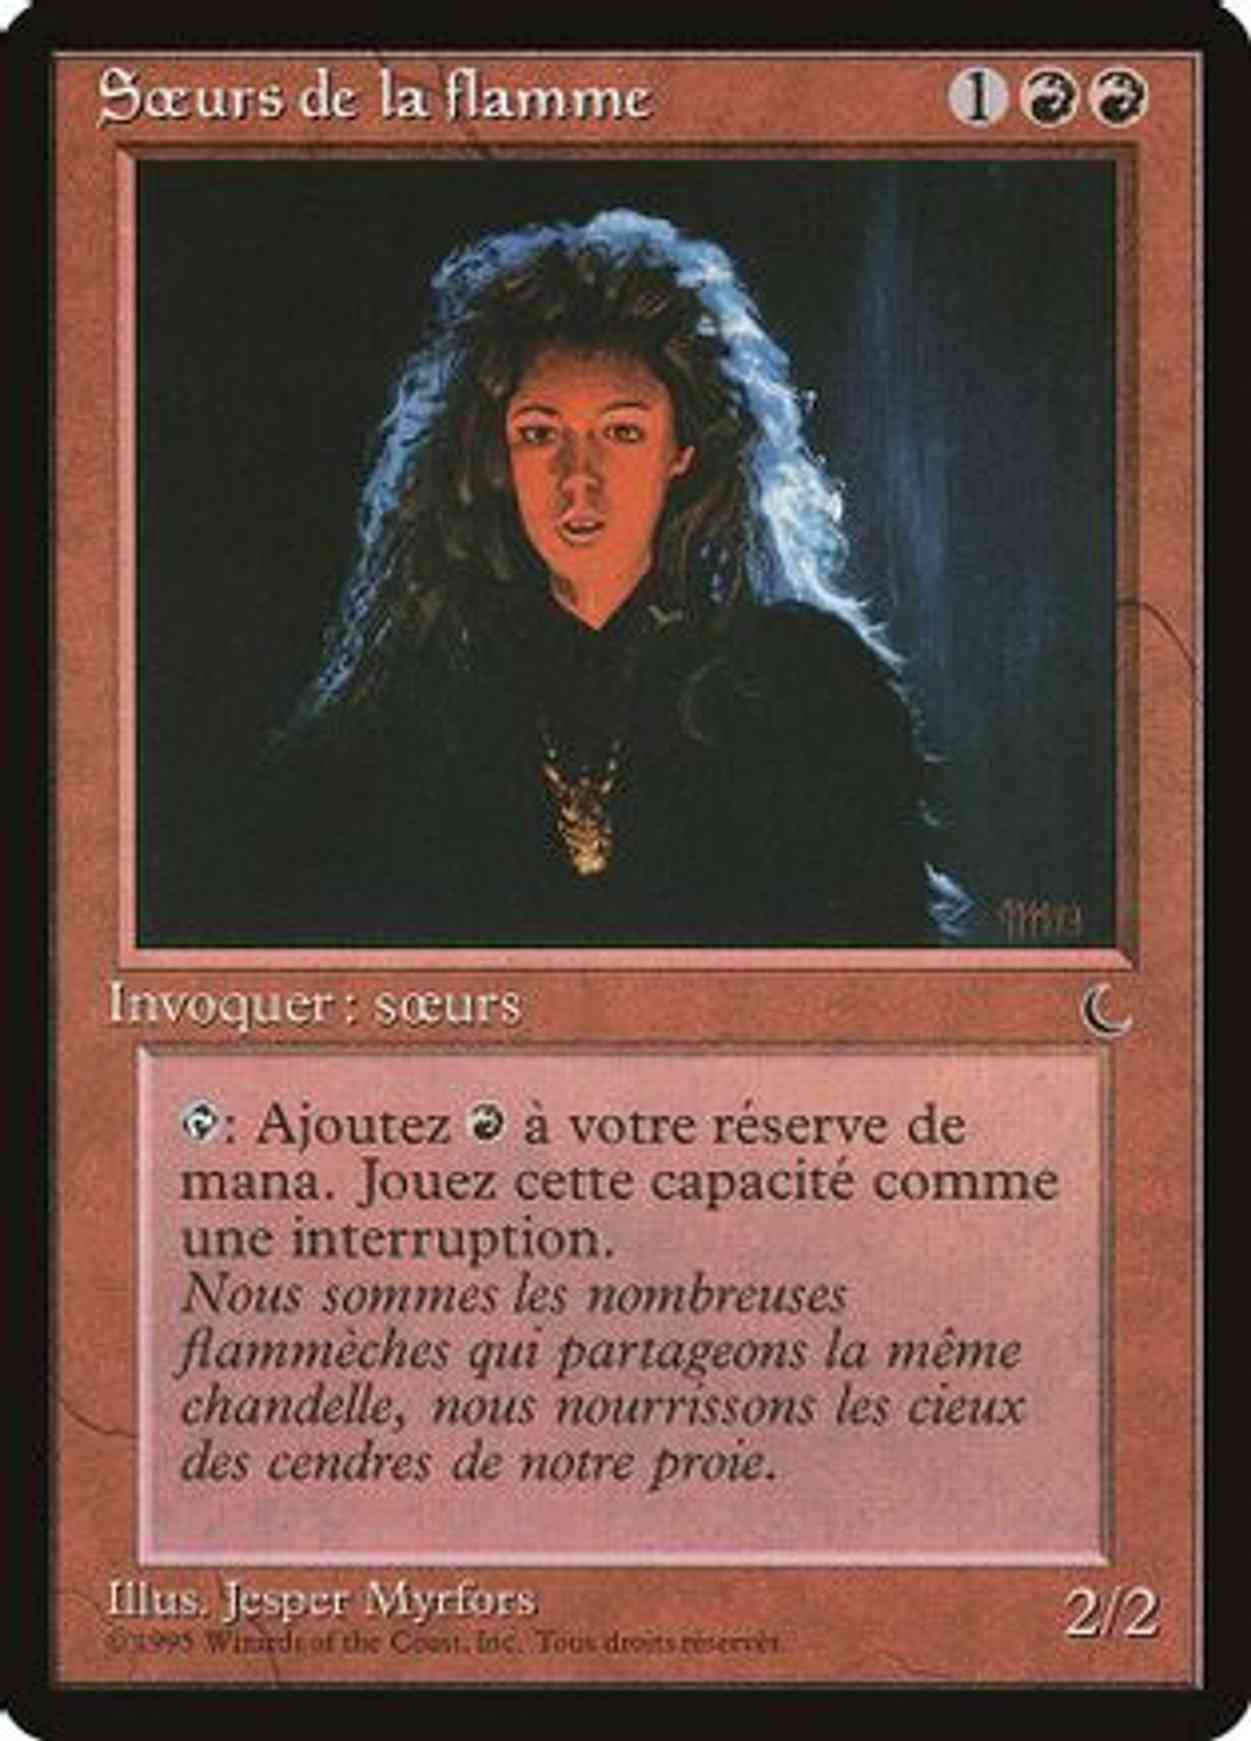 Sisters of the Flame (French) - "Soeurs de la flamme" magic card front